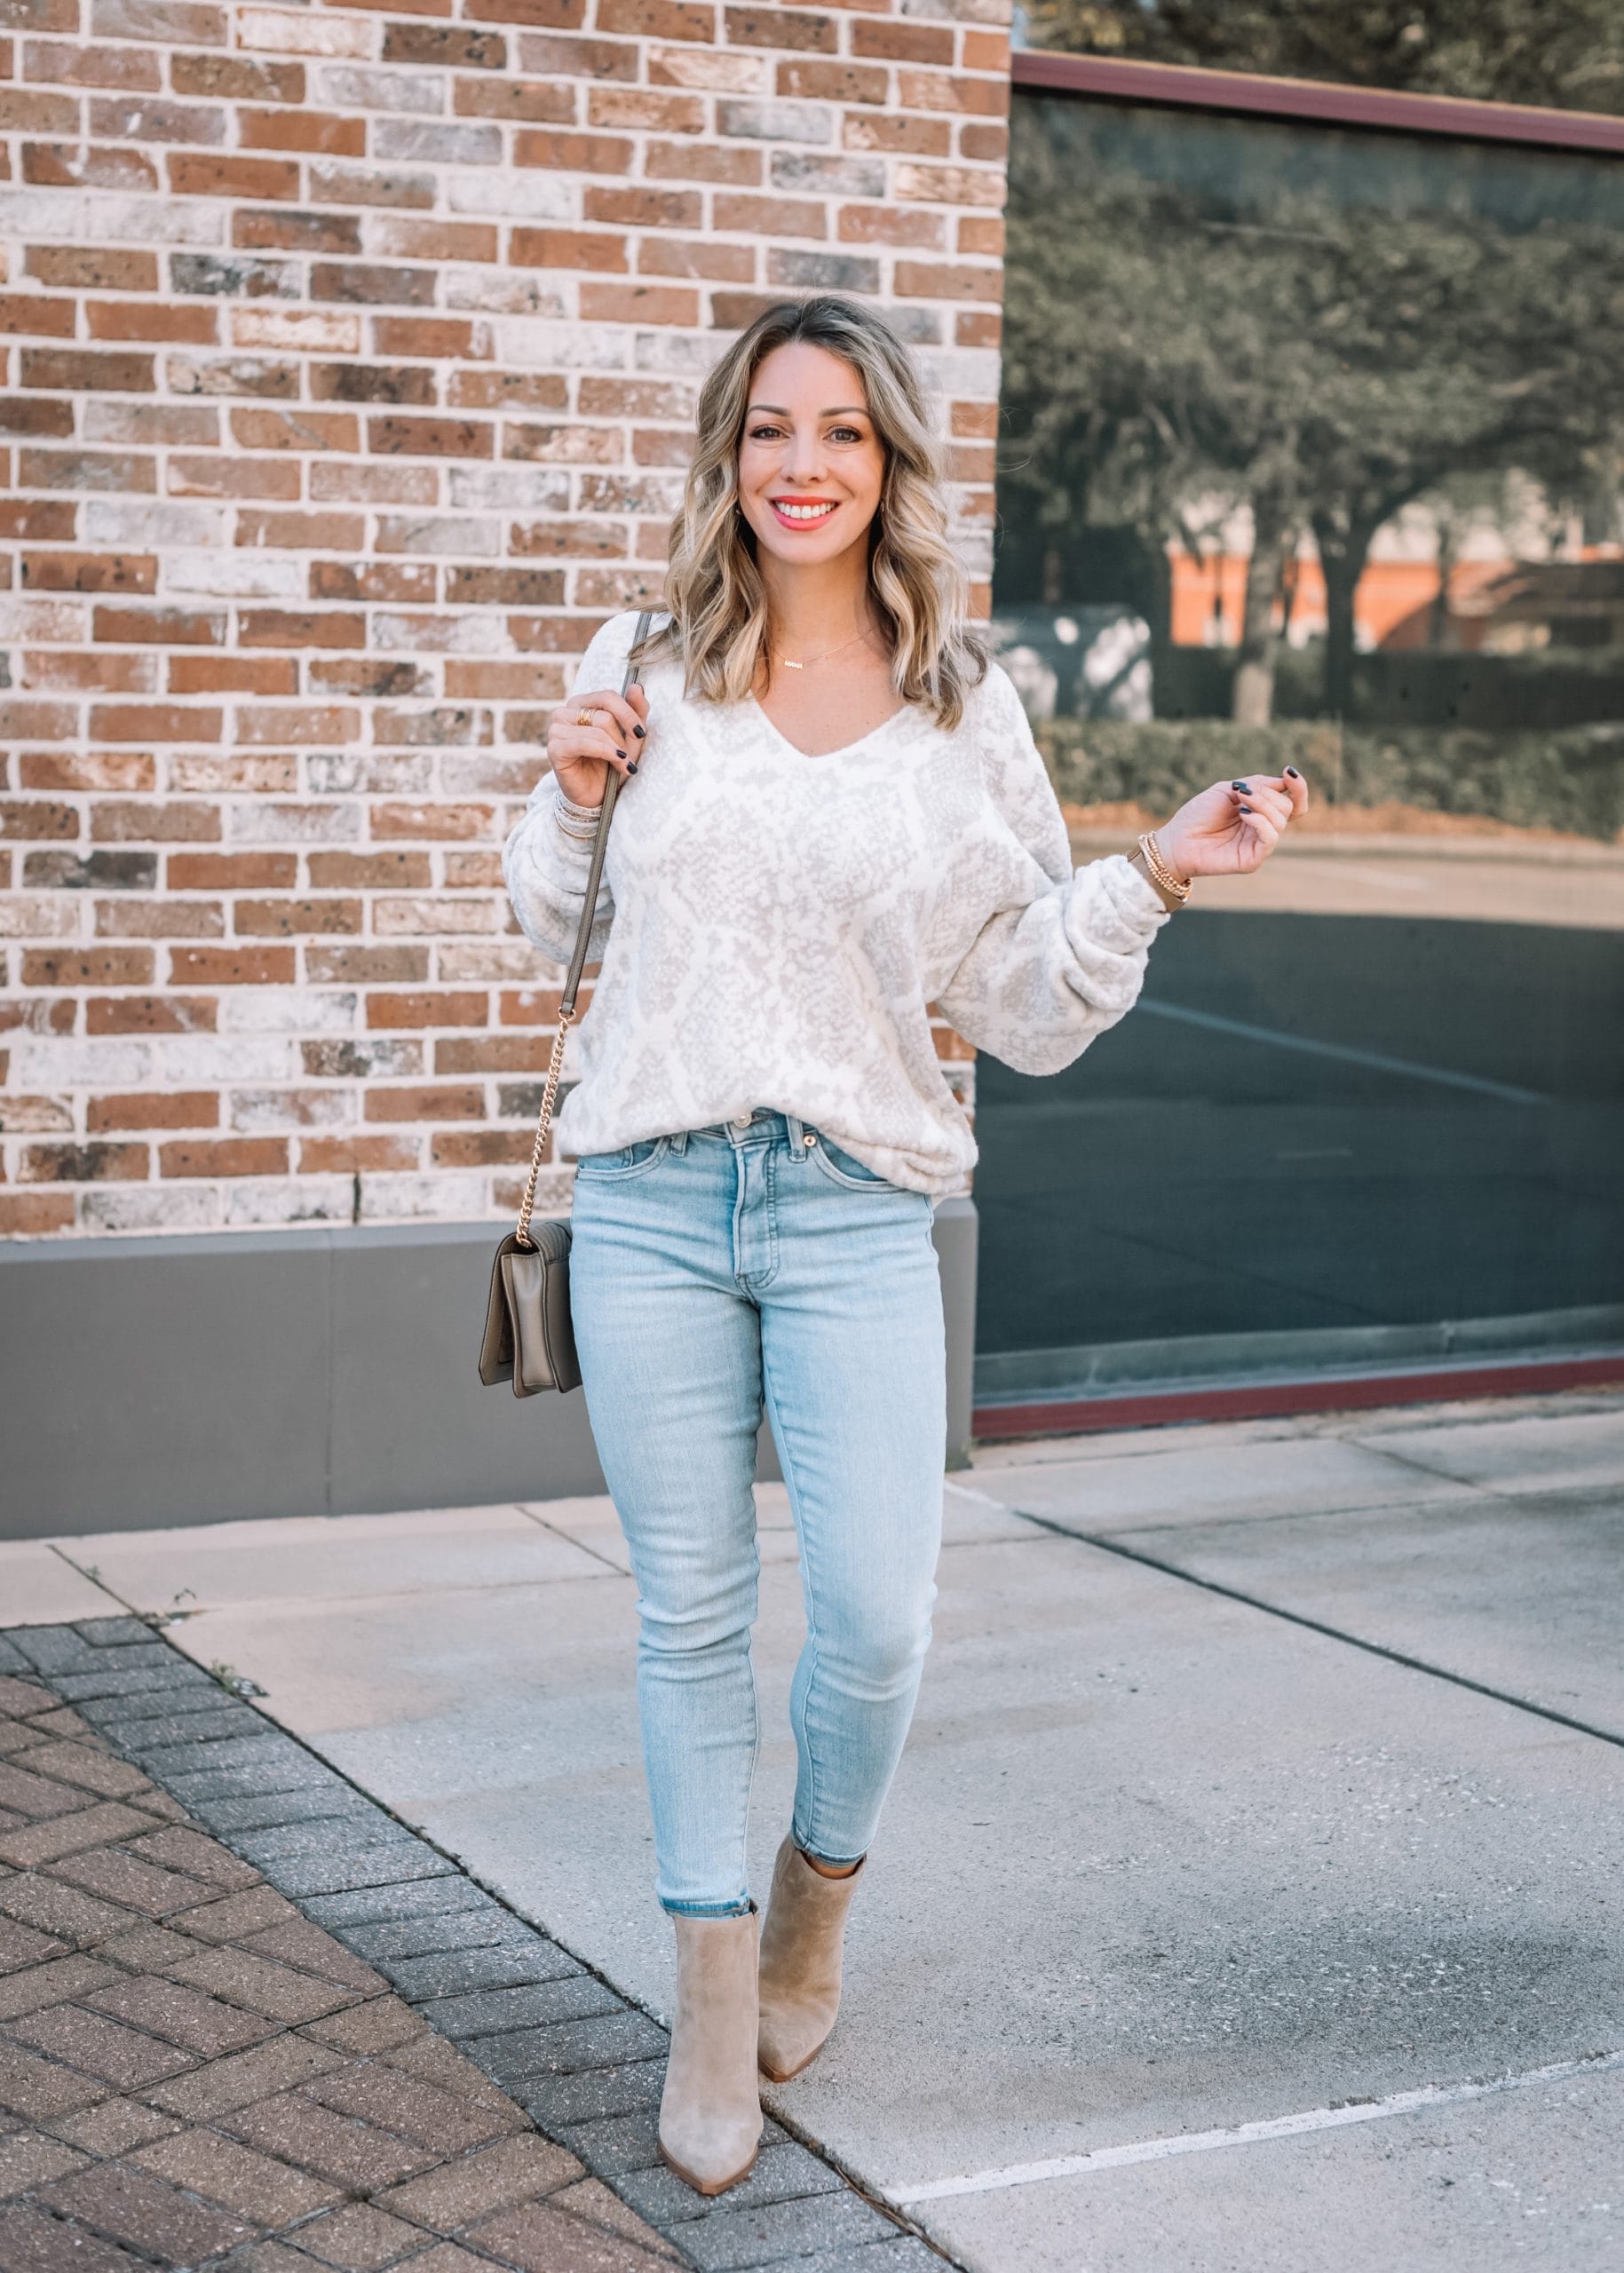 Express Fashion, Snakeskin Sweater, Jeans, Booties